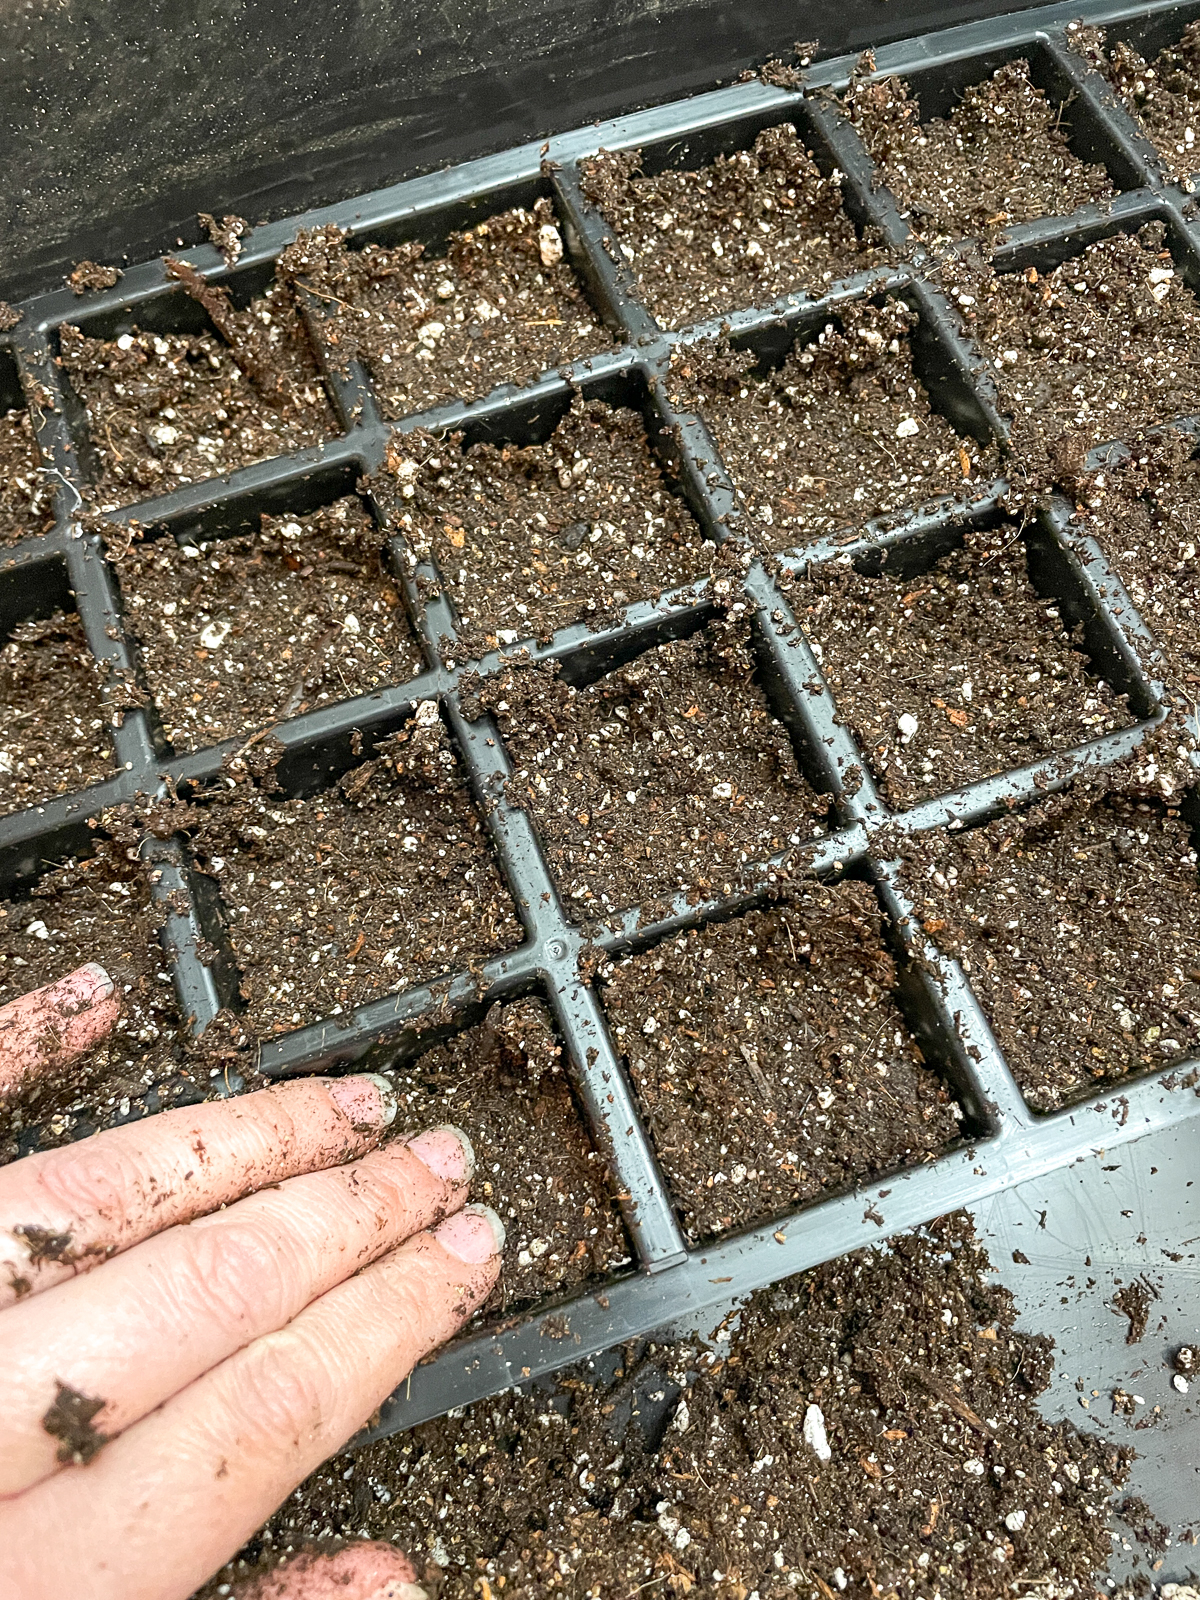 pressing out air pockets in seed starting tray soil